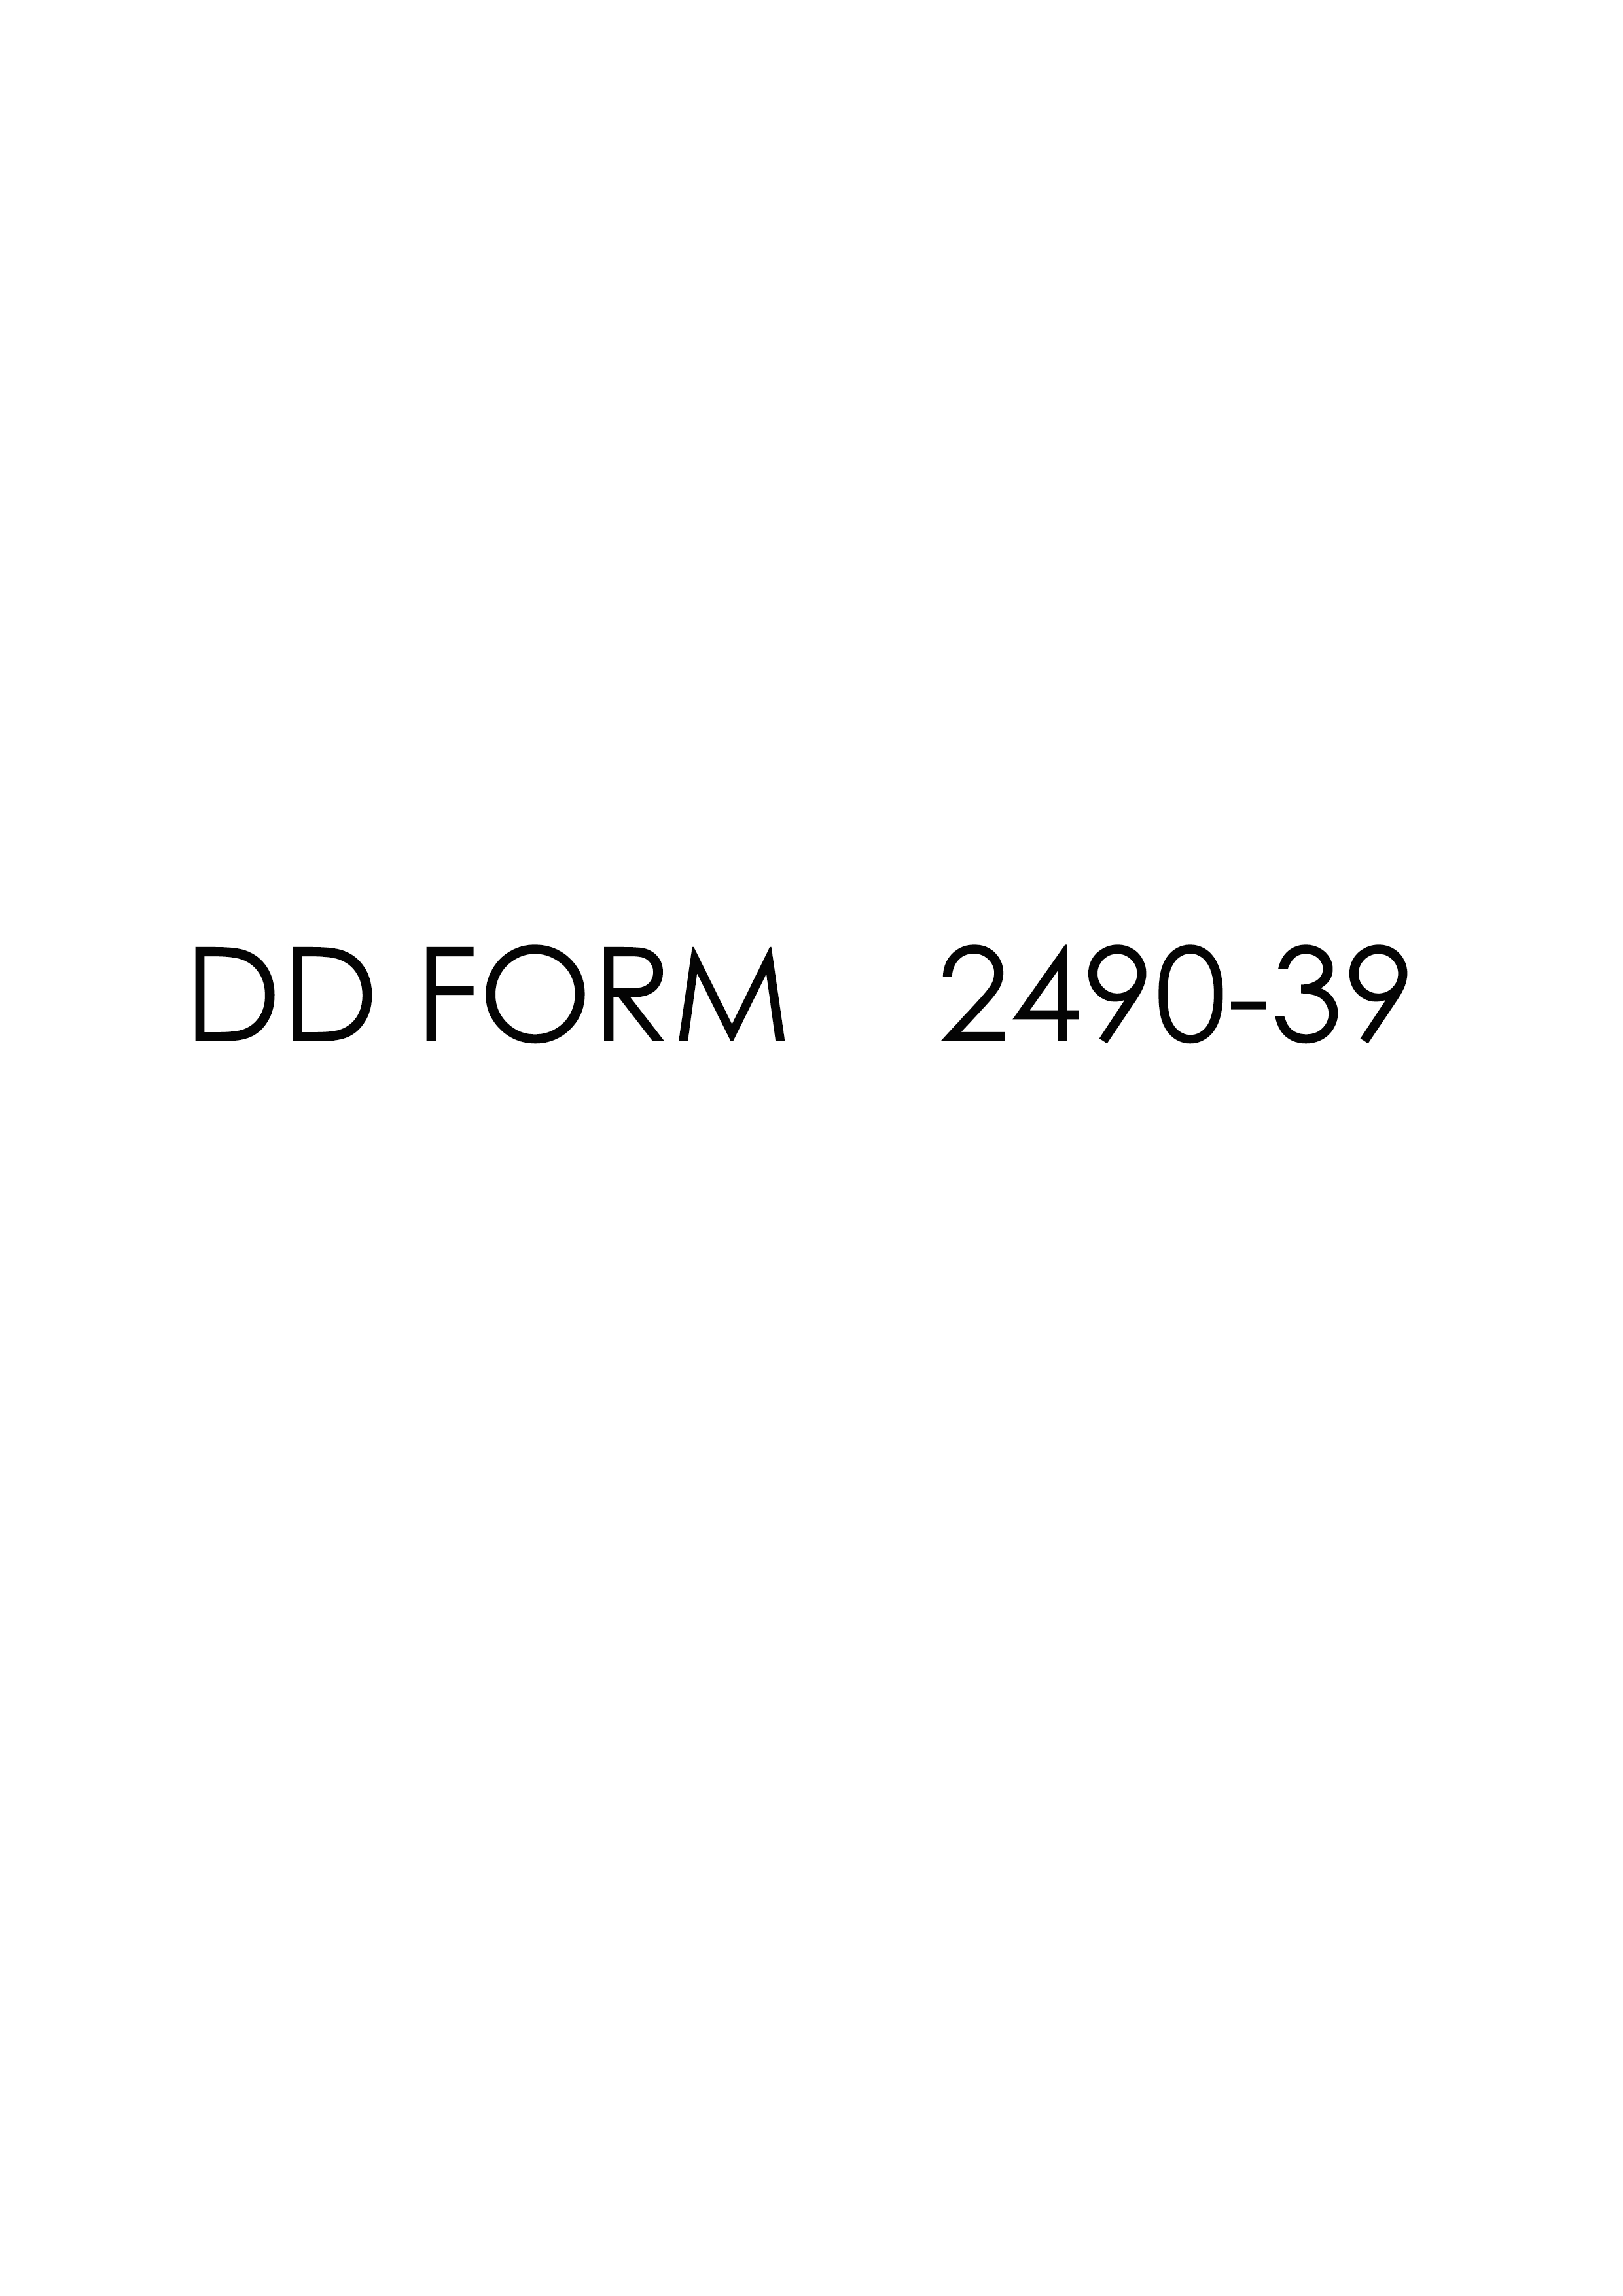 Download Fillable dd Form 2490-39